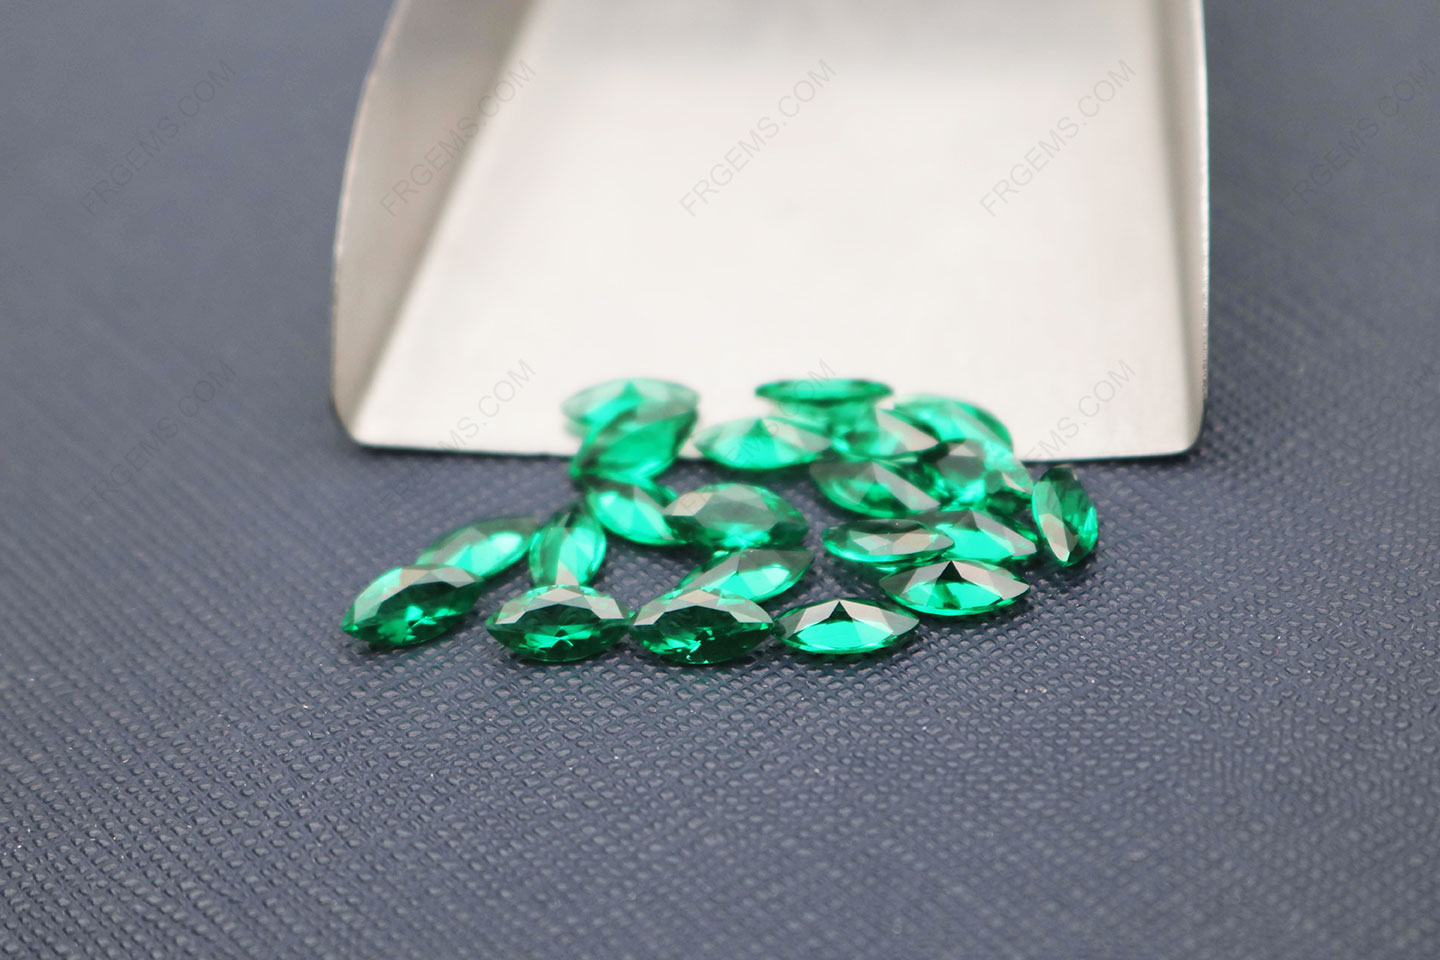 Wholesale loose Nano Emerald Green #112 Marquise Shape Faceted Cut 4x8mm gemstones